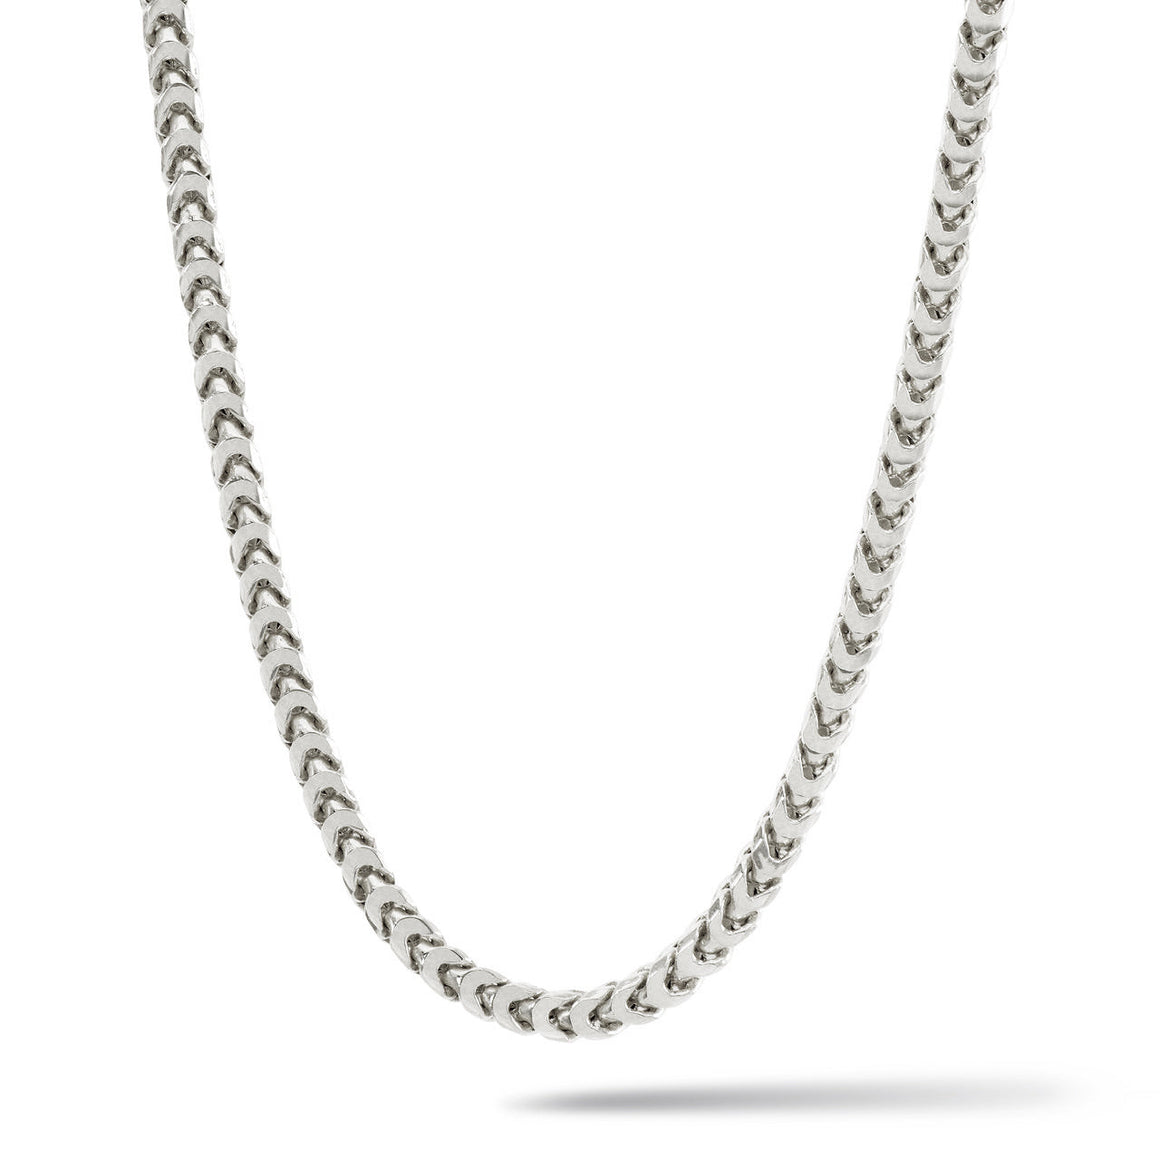 a 3mm silver franco chain hanging over a white surface